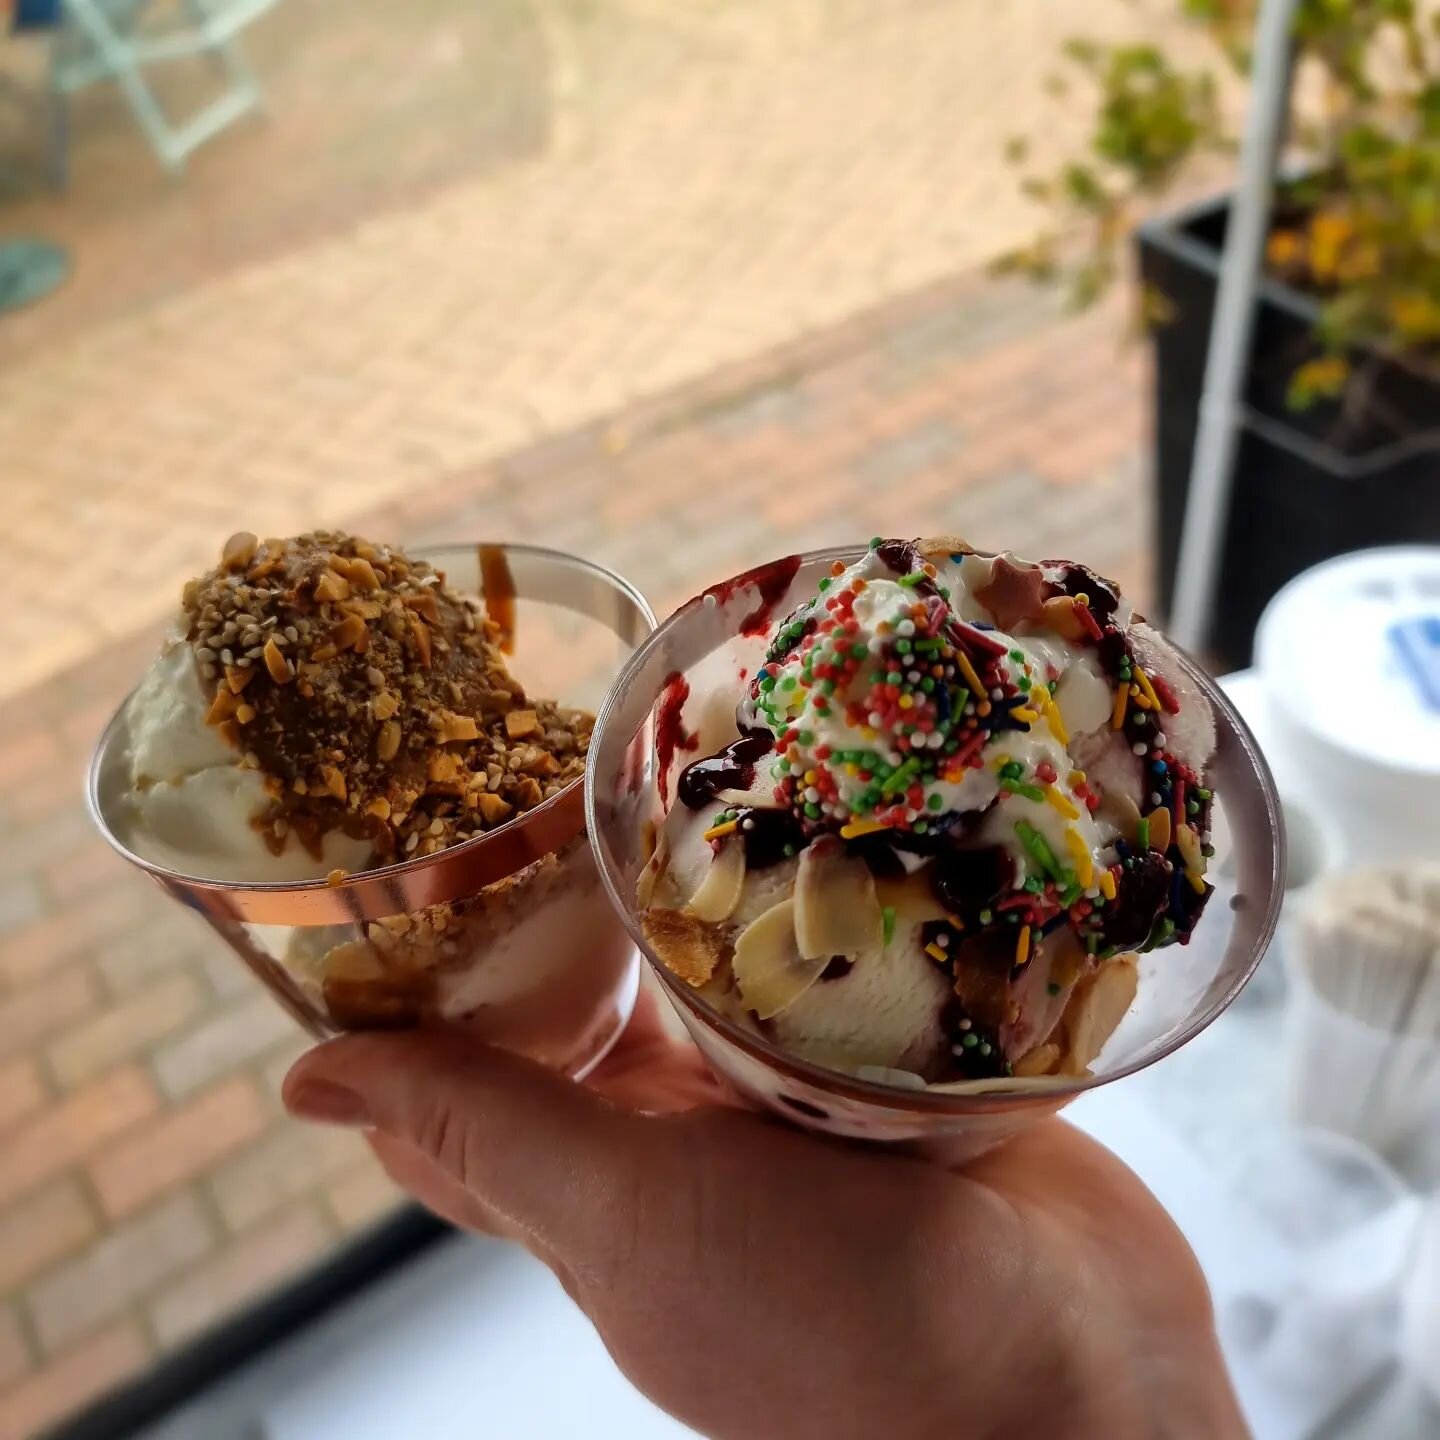 What a bank holiday!! We had so much fun, slinging burgers and ice creams out while dancing the day away and seeing some of your lovely faces of course. 
Here is the cherry ripple ice cream with all the sauce and sprinkles and the grown up coconut ic